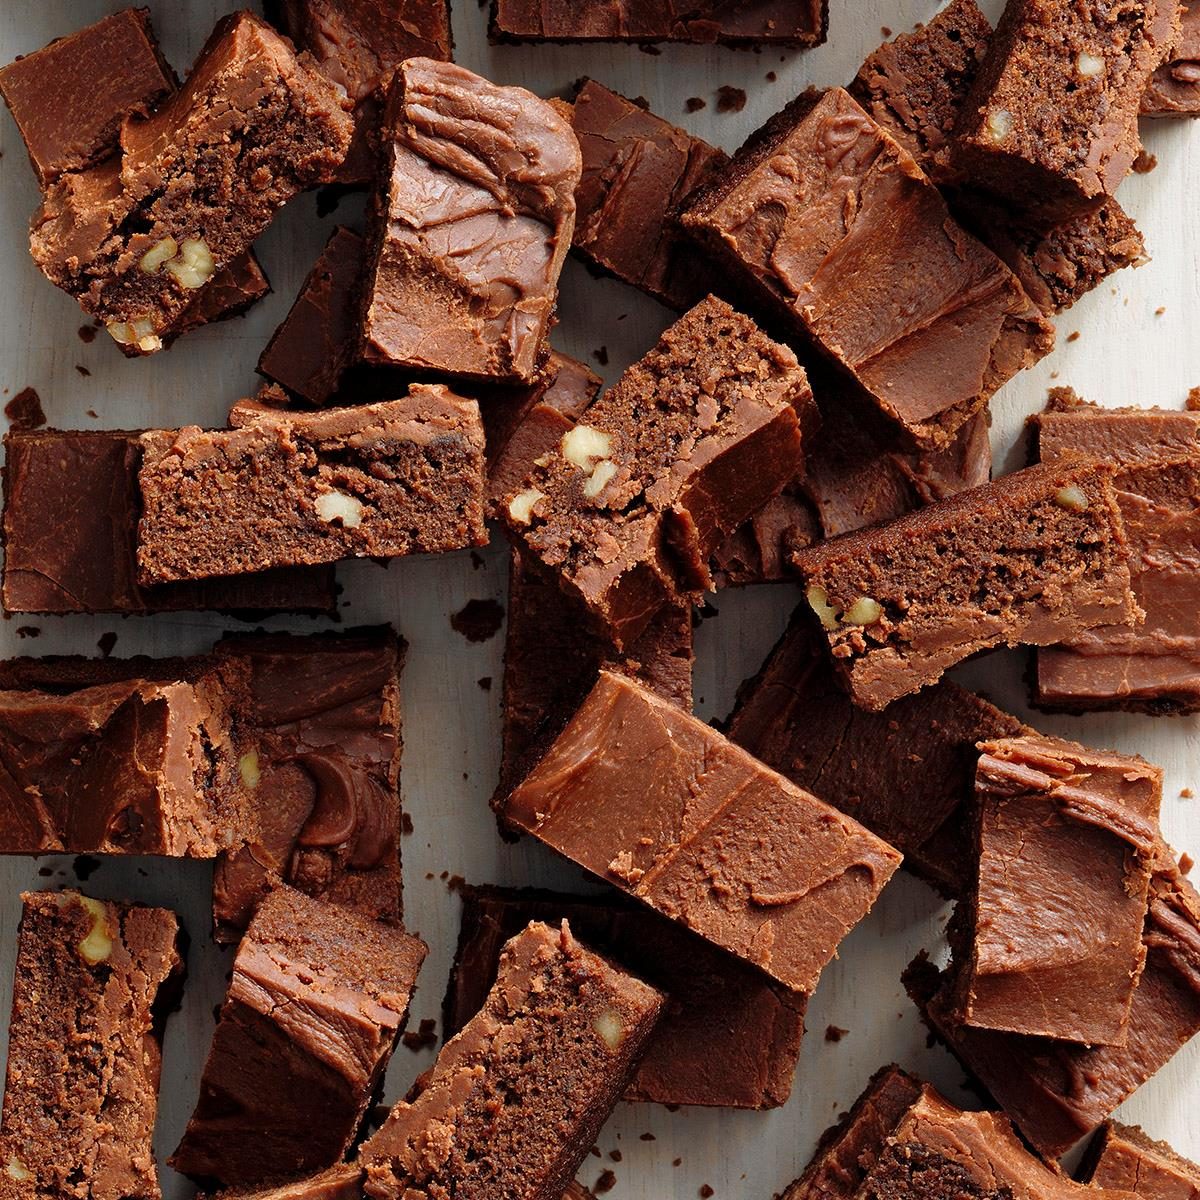 https://www.tasteofhome.com/wp-content/uploads/2018/01/Iced-Brownies_EXPS_TOHFM22_4517_E09_22_2b-12.jpg?fit=700%2C1024